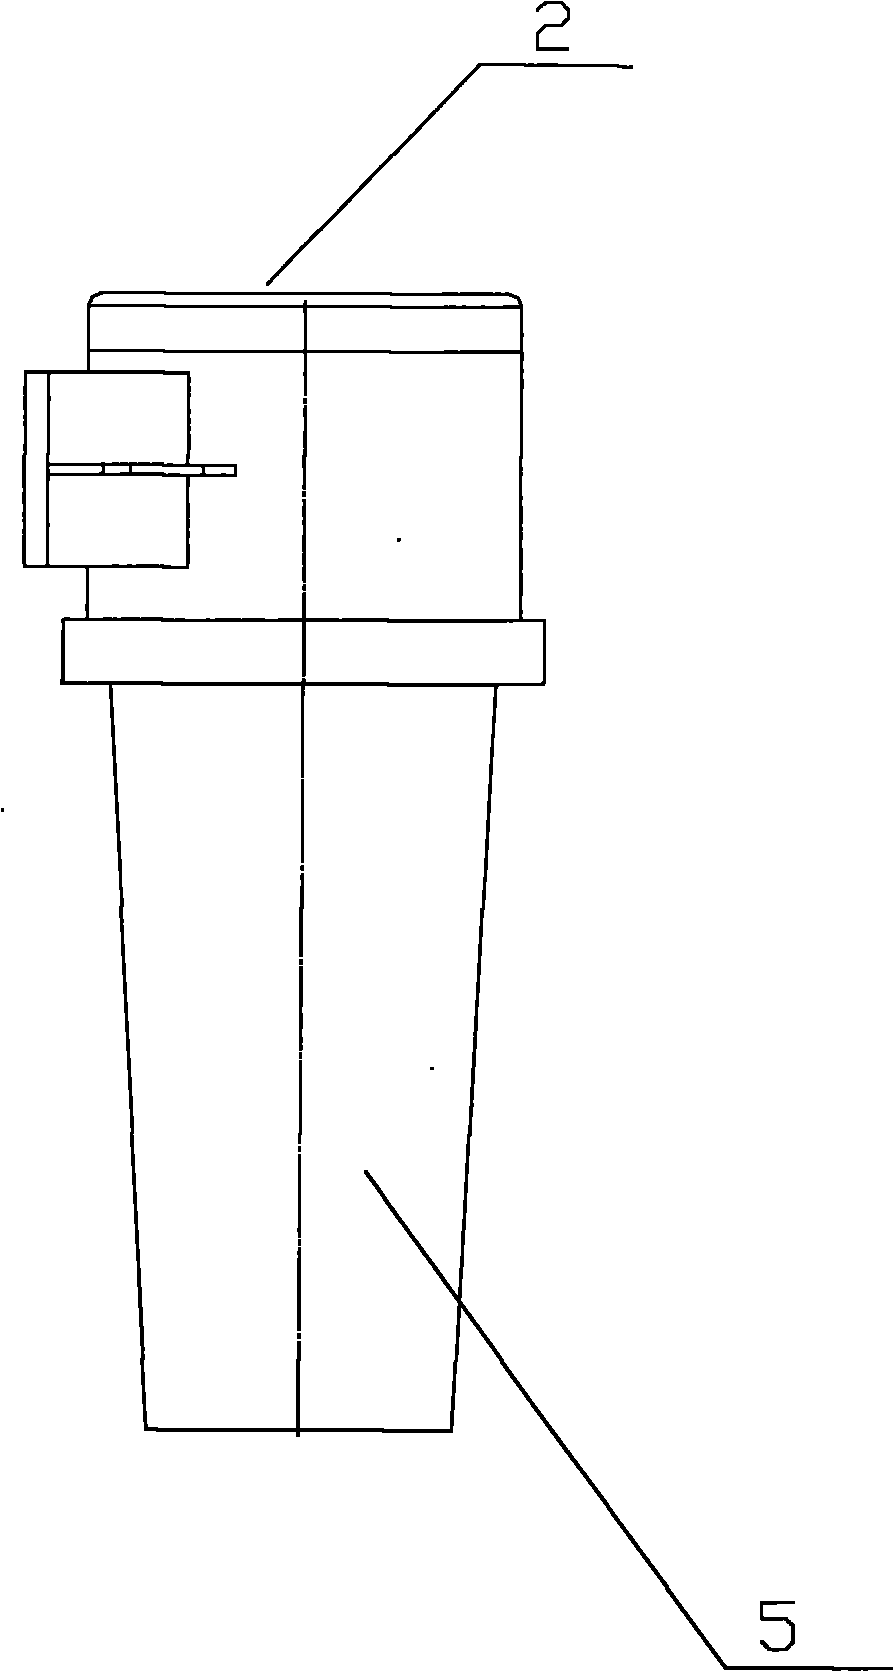 Juicer and refrigerator with same